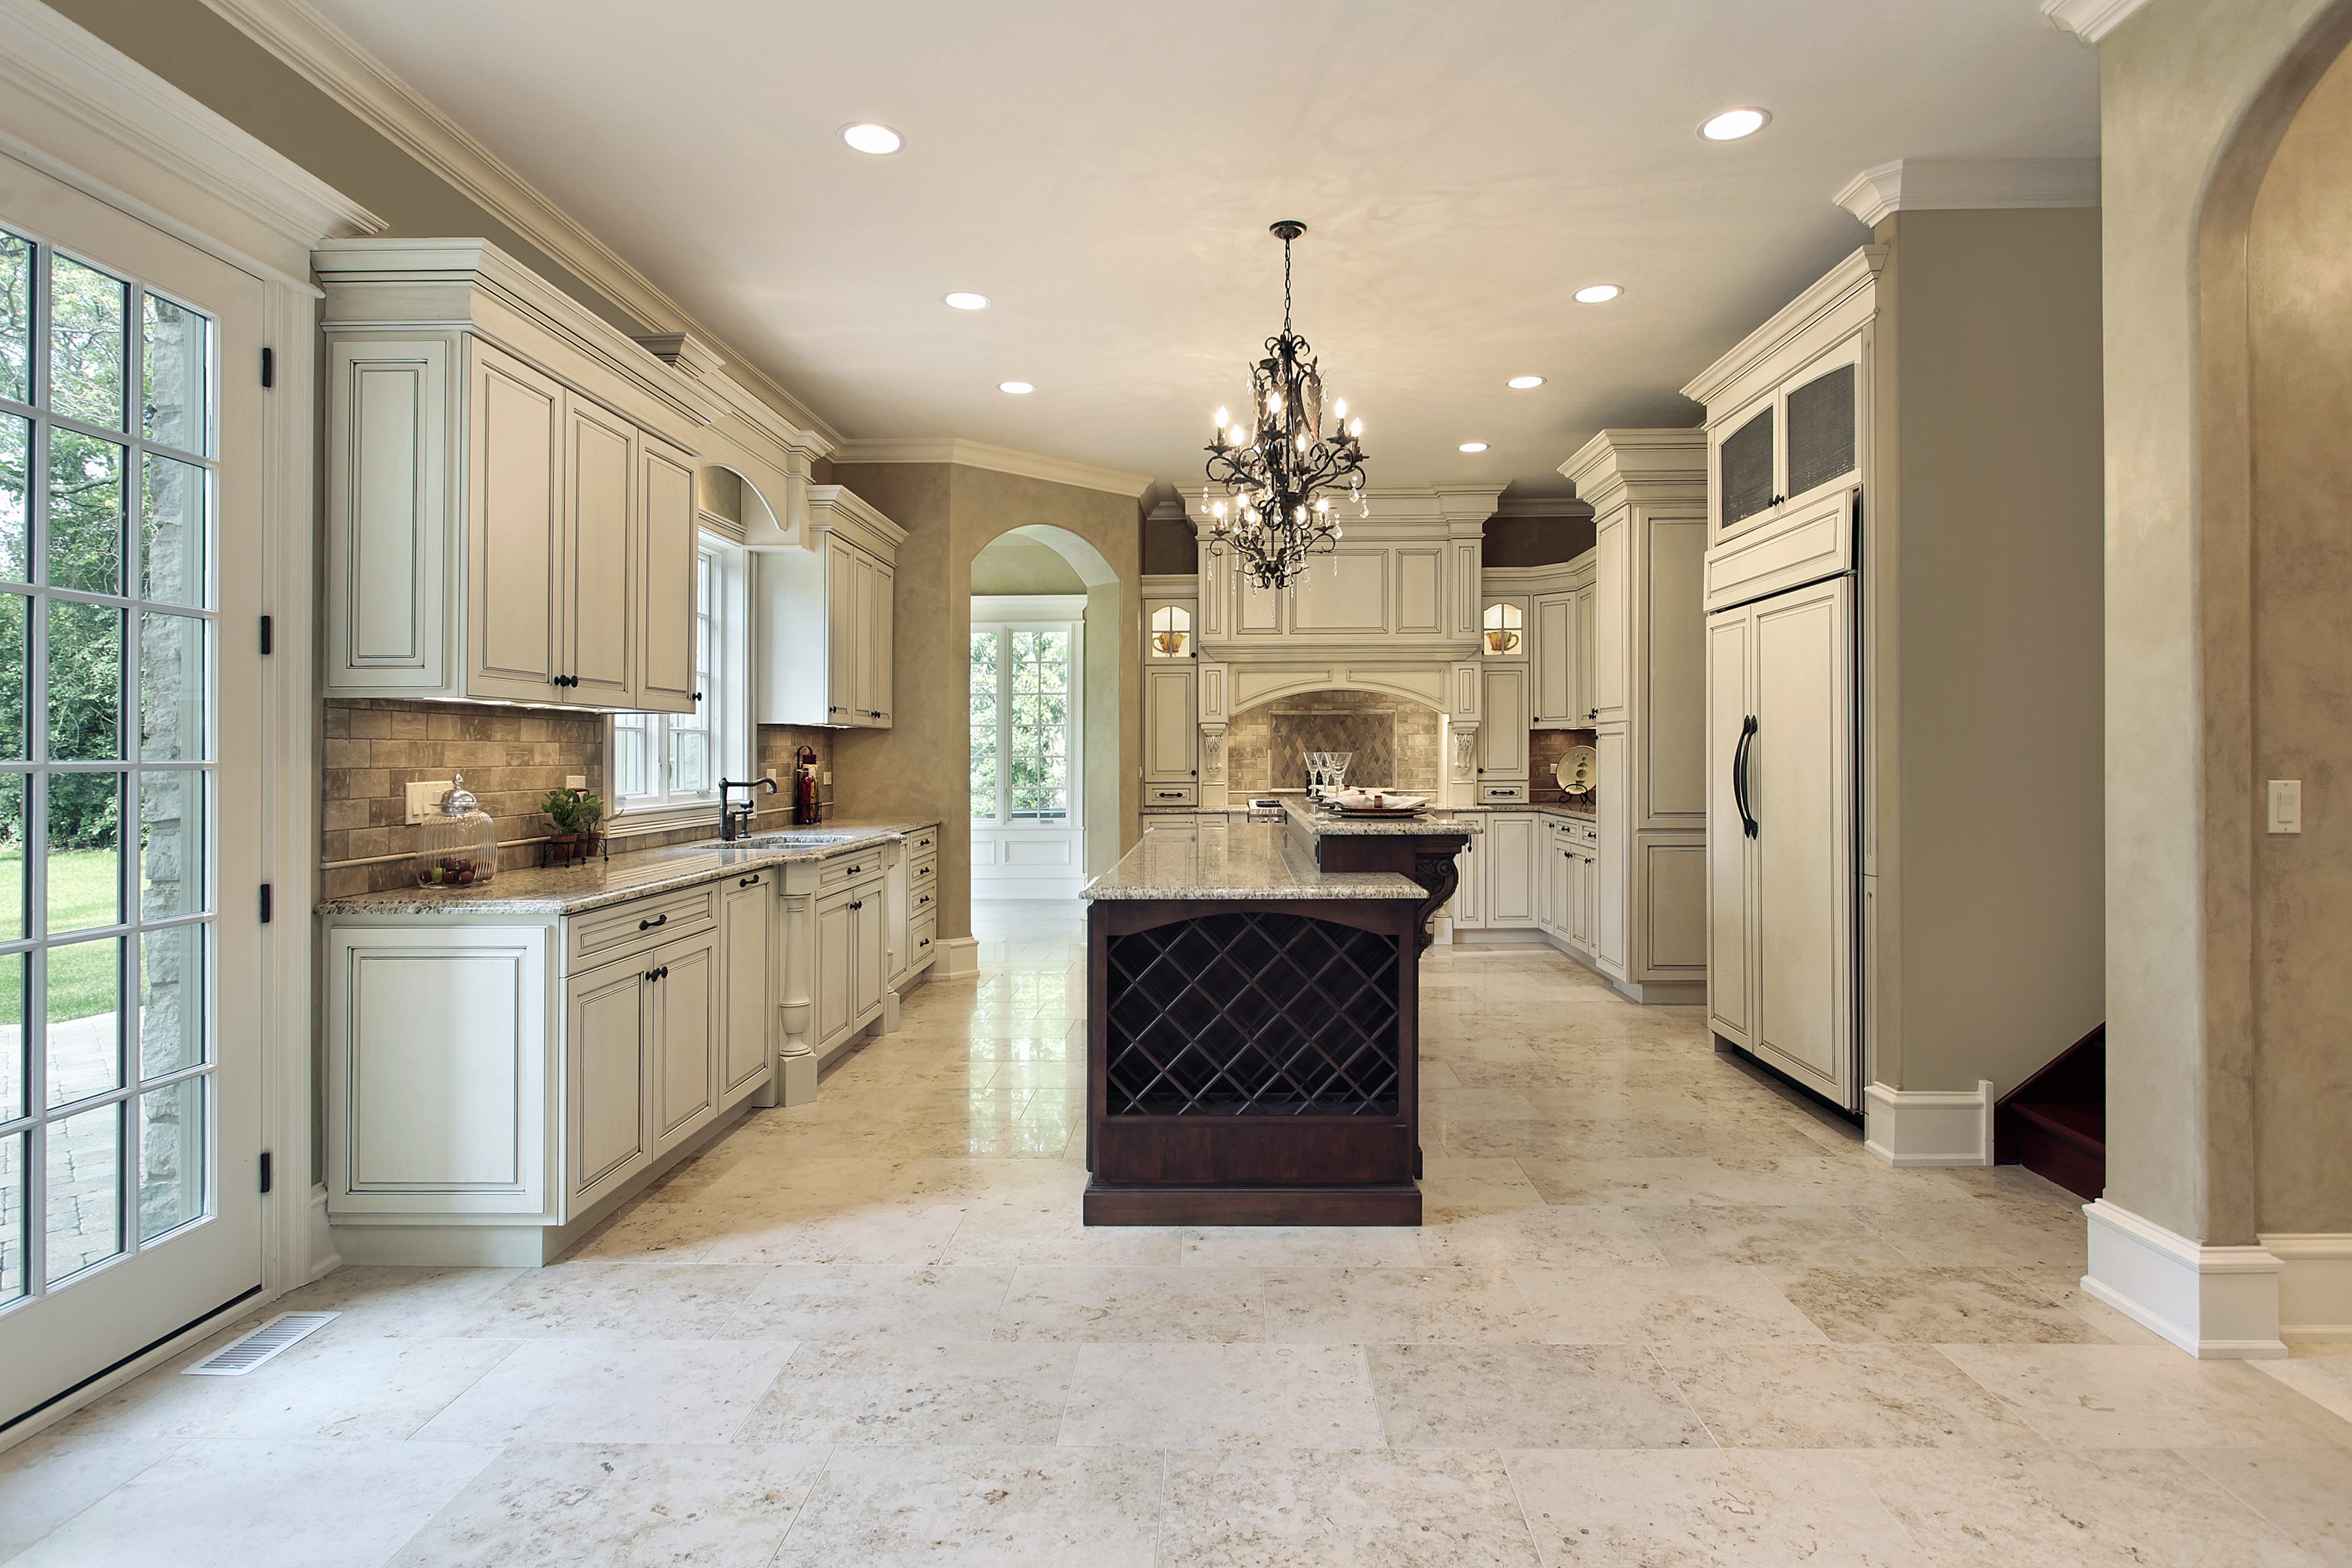 Should You Make Kitchen Improvements Before You Sell Your Home in Tampa